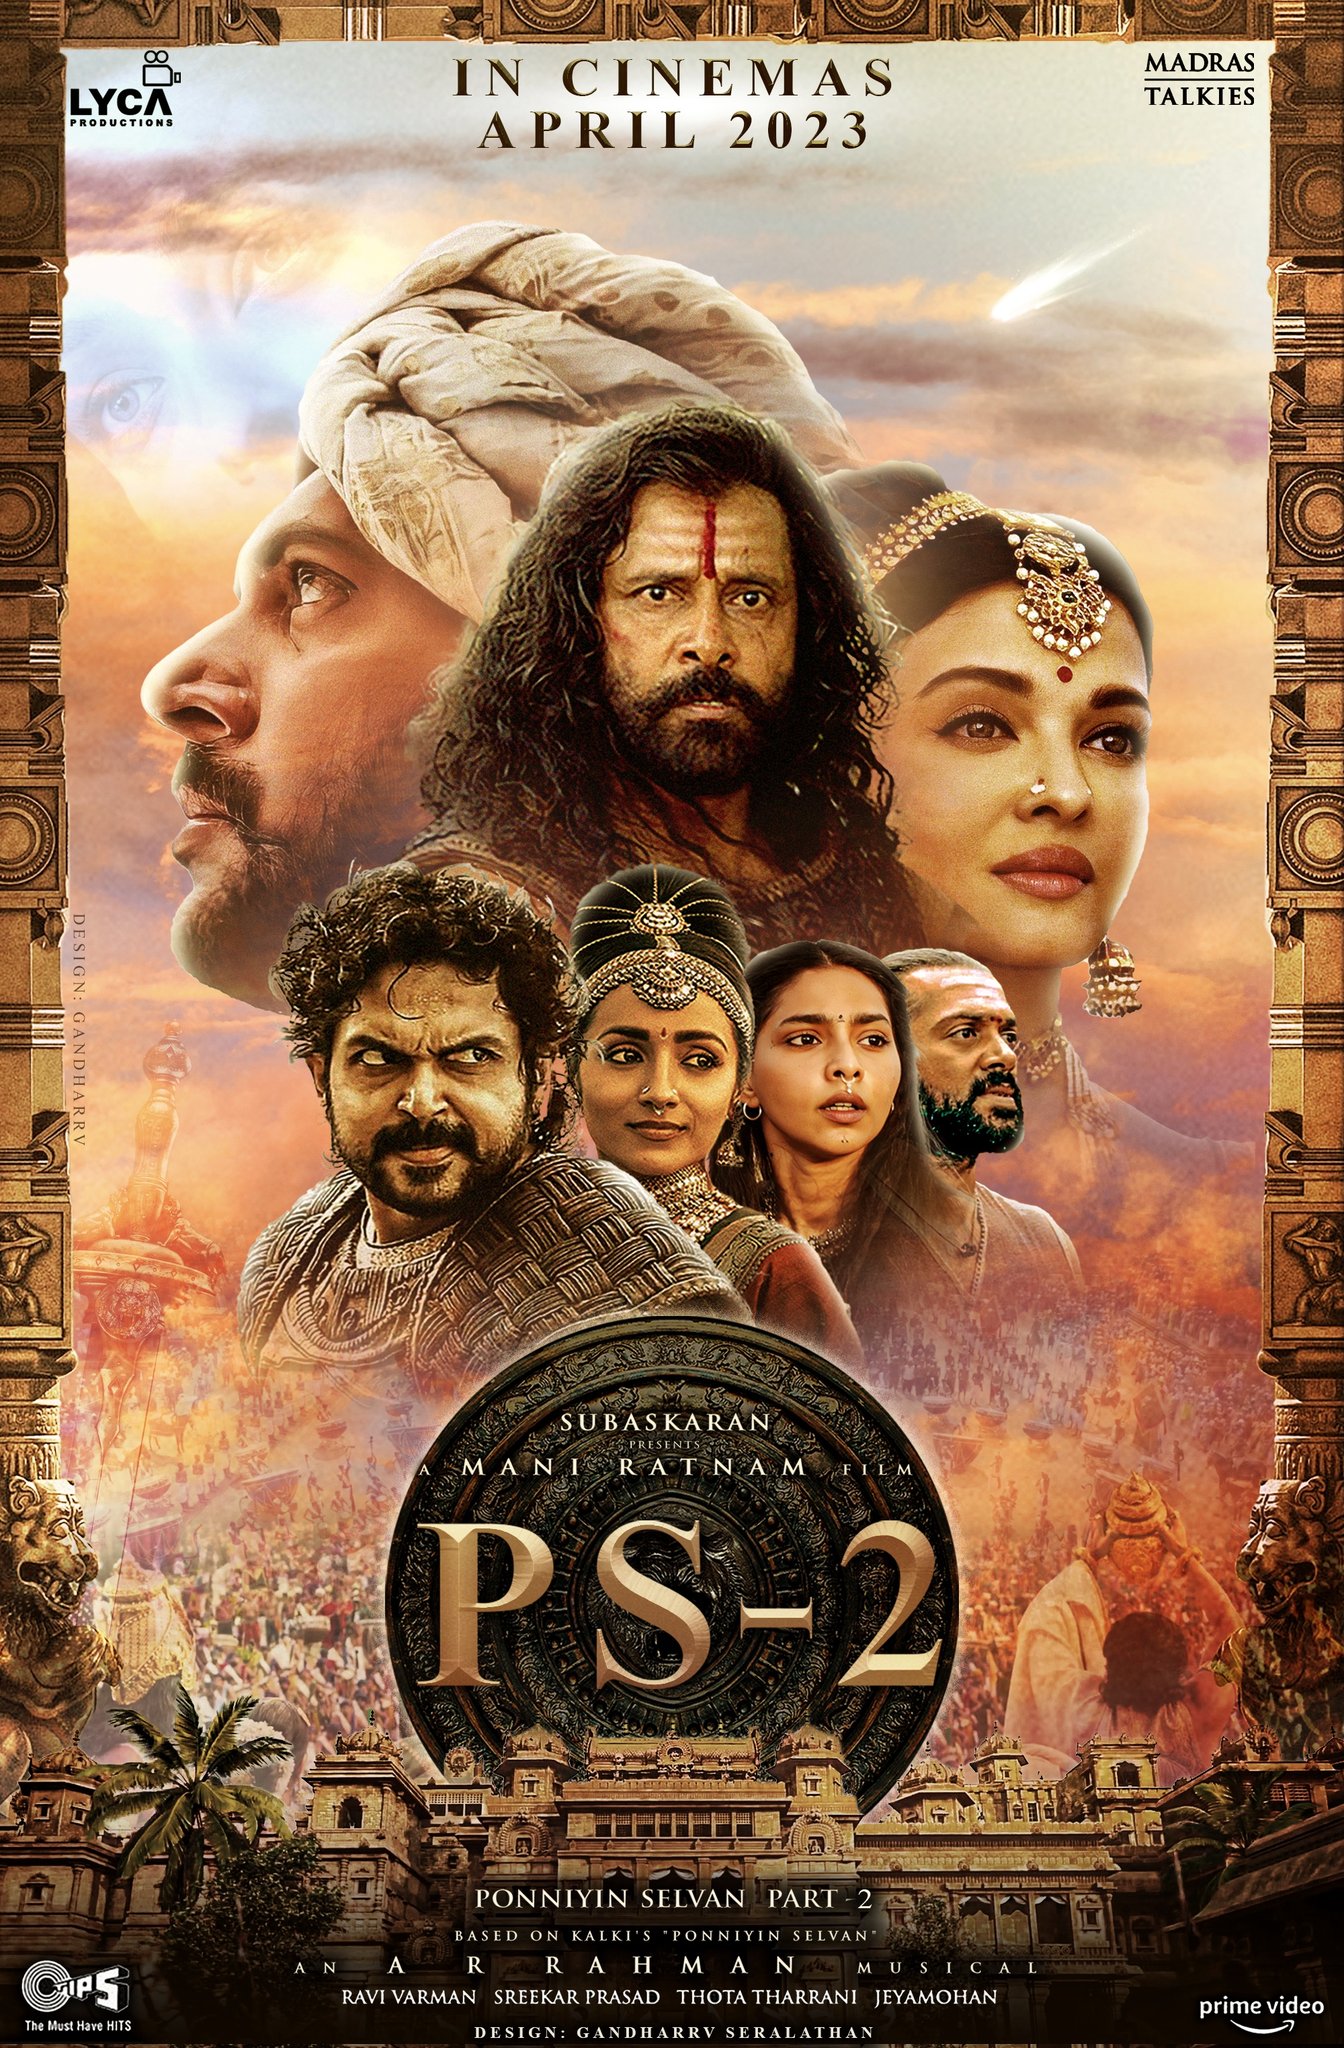 Ponniyin Selvan: Part Two Movie Review | Ponniyin Selvan: Part Two Filmy Rating 2023